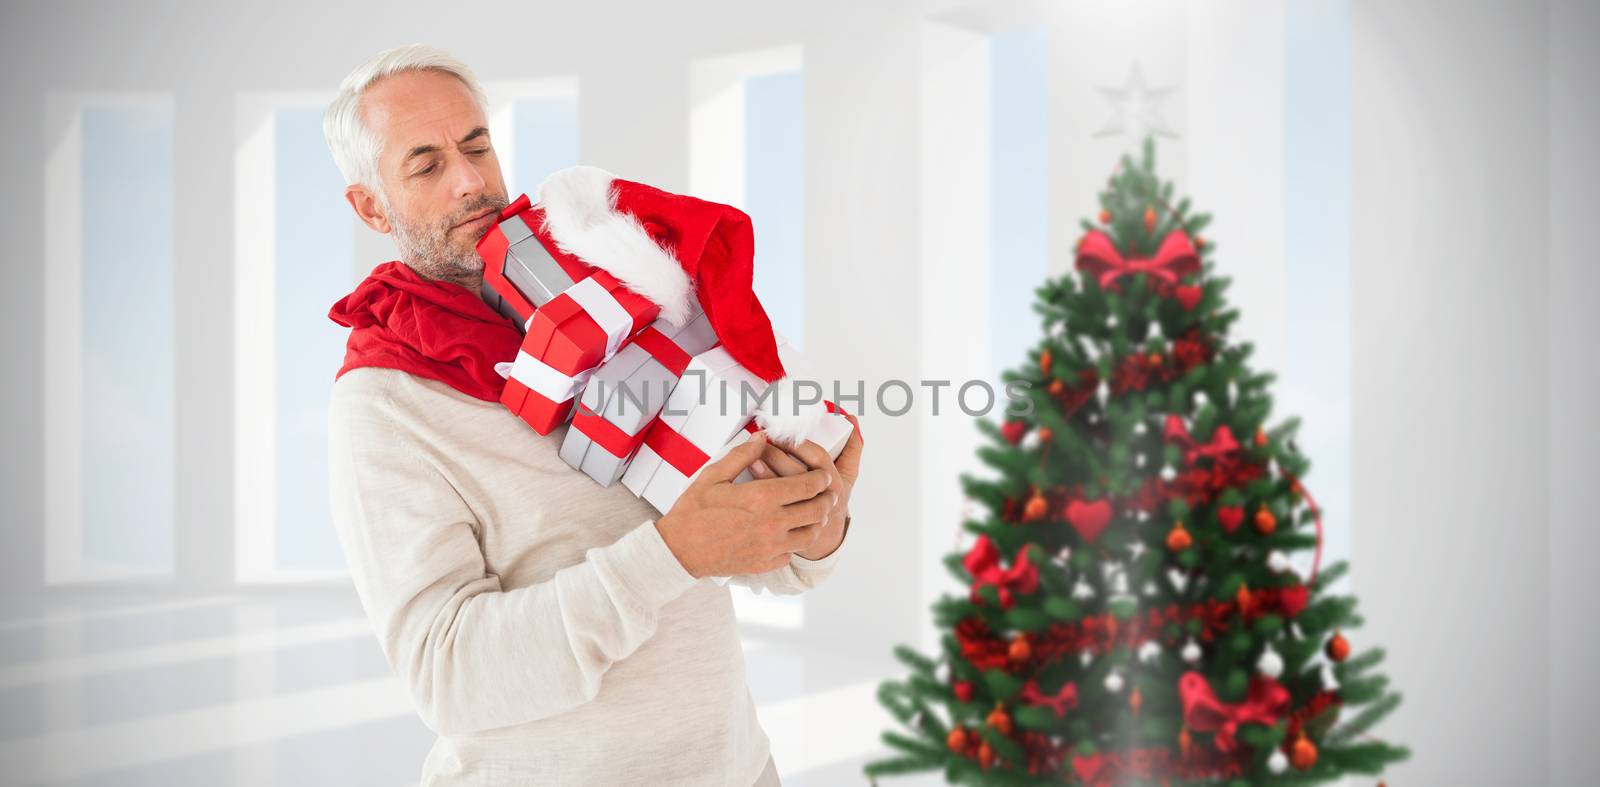 Composite image of happy festive man with gifts by Wavebreakmedia